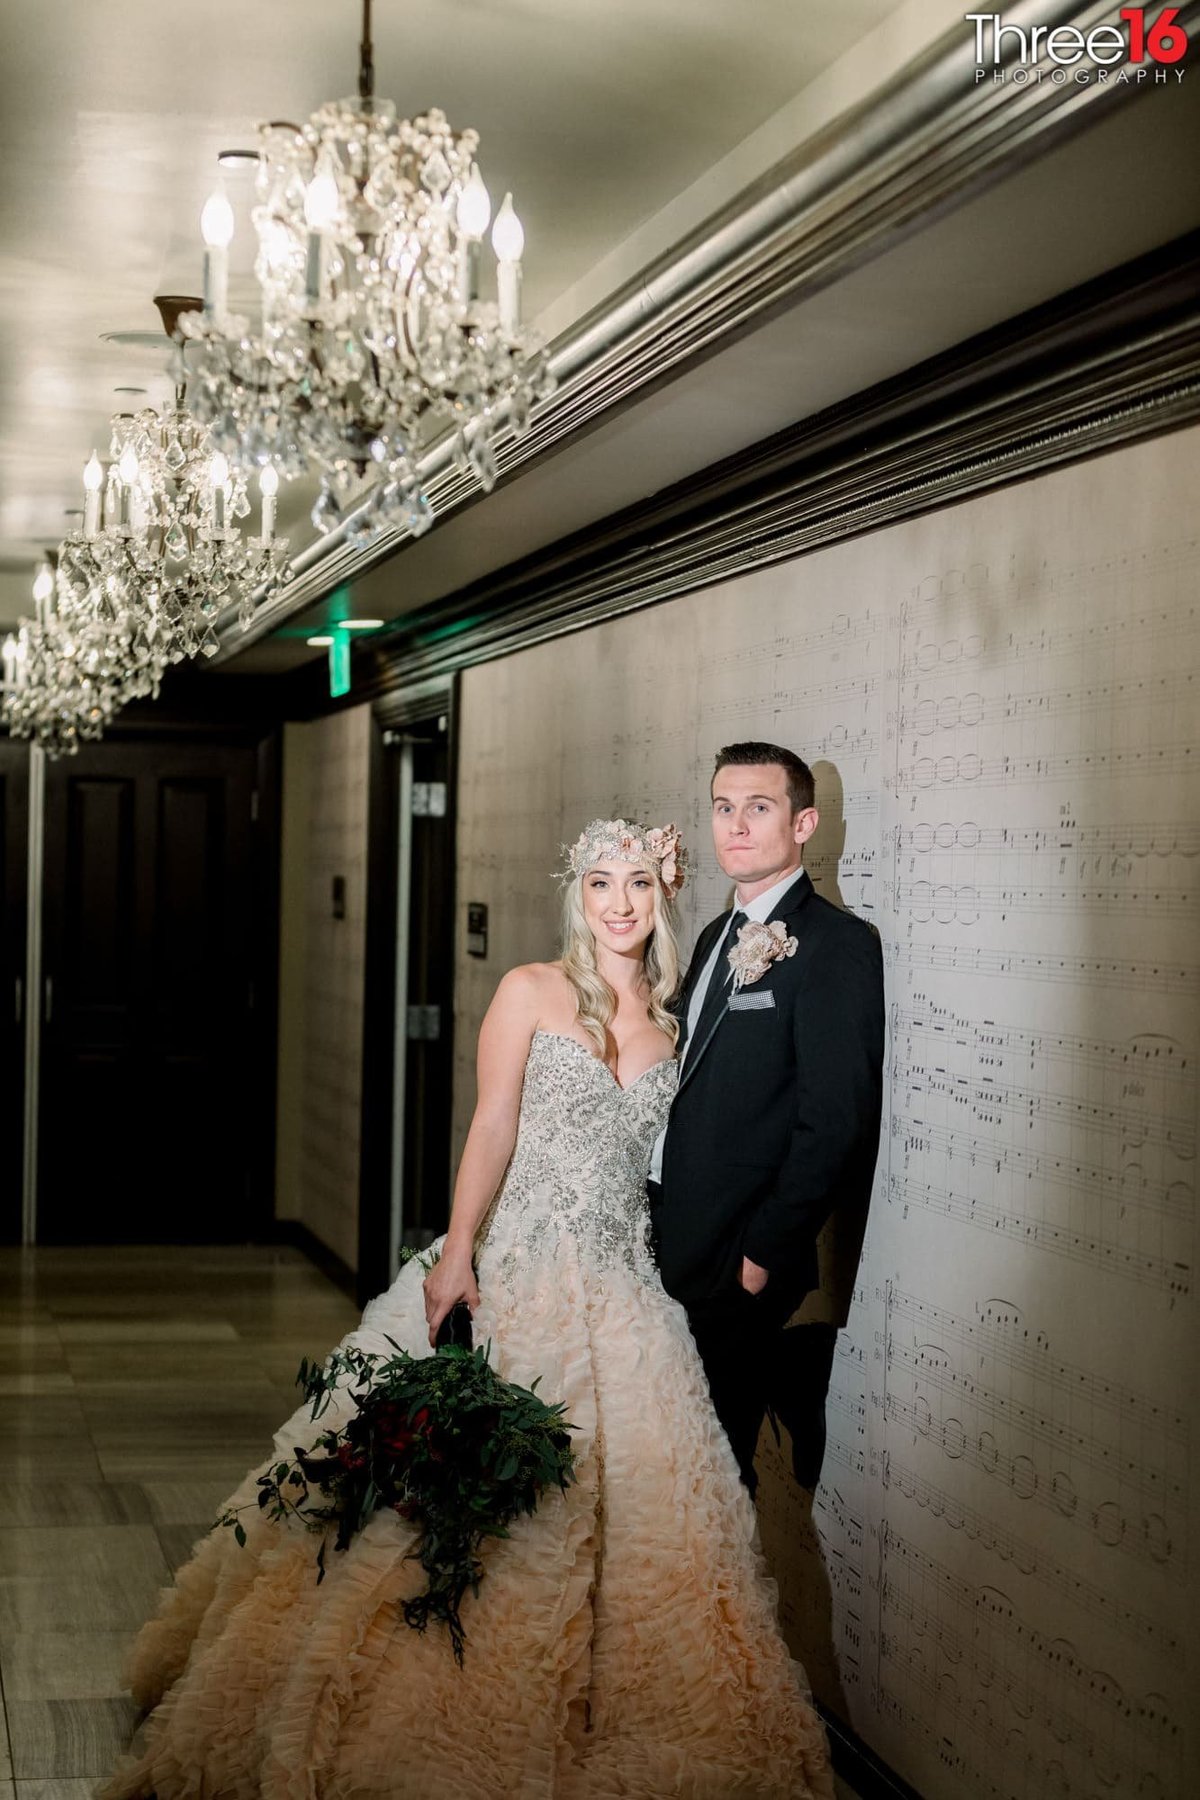 Bride and Groom pose for photos in the hallway at the Center Club Orange County